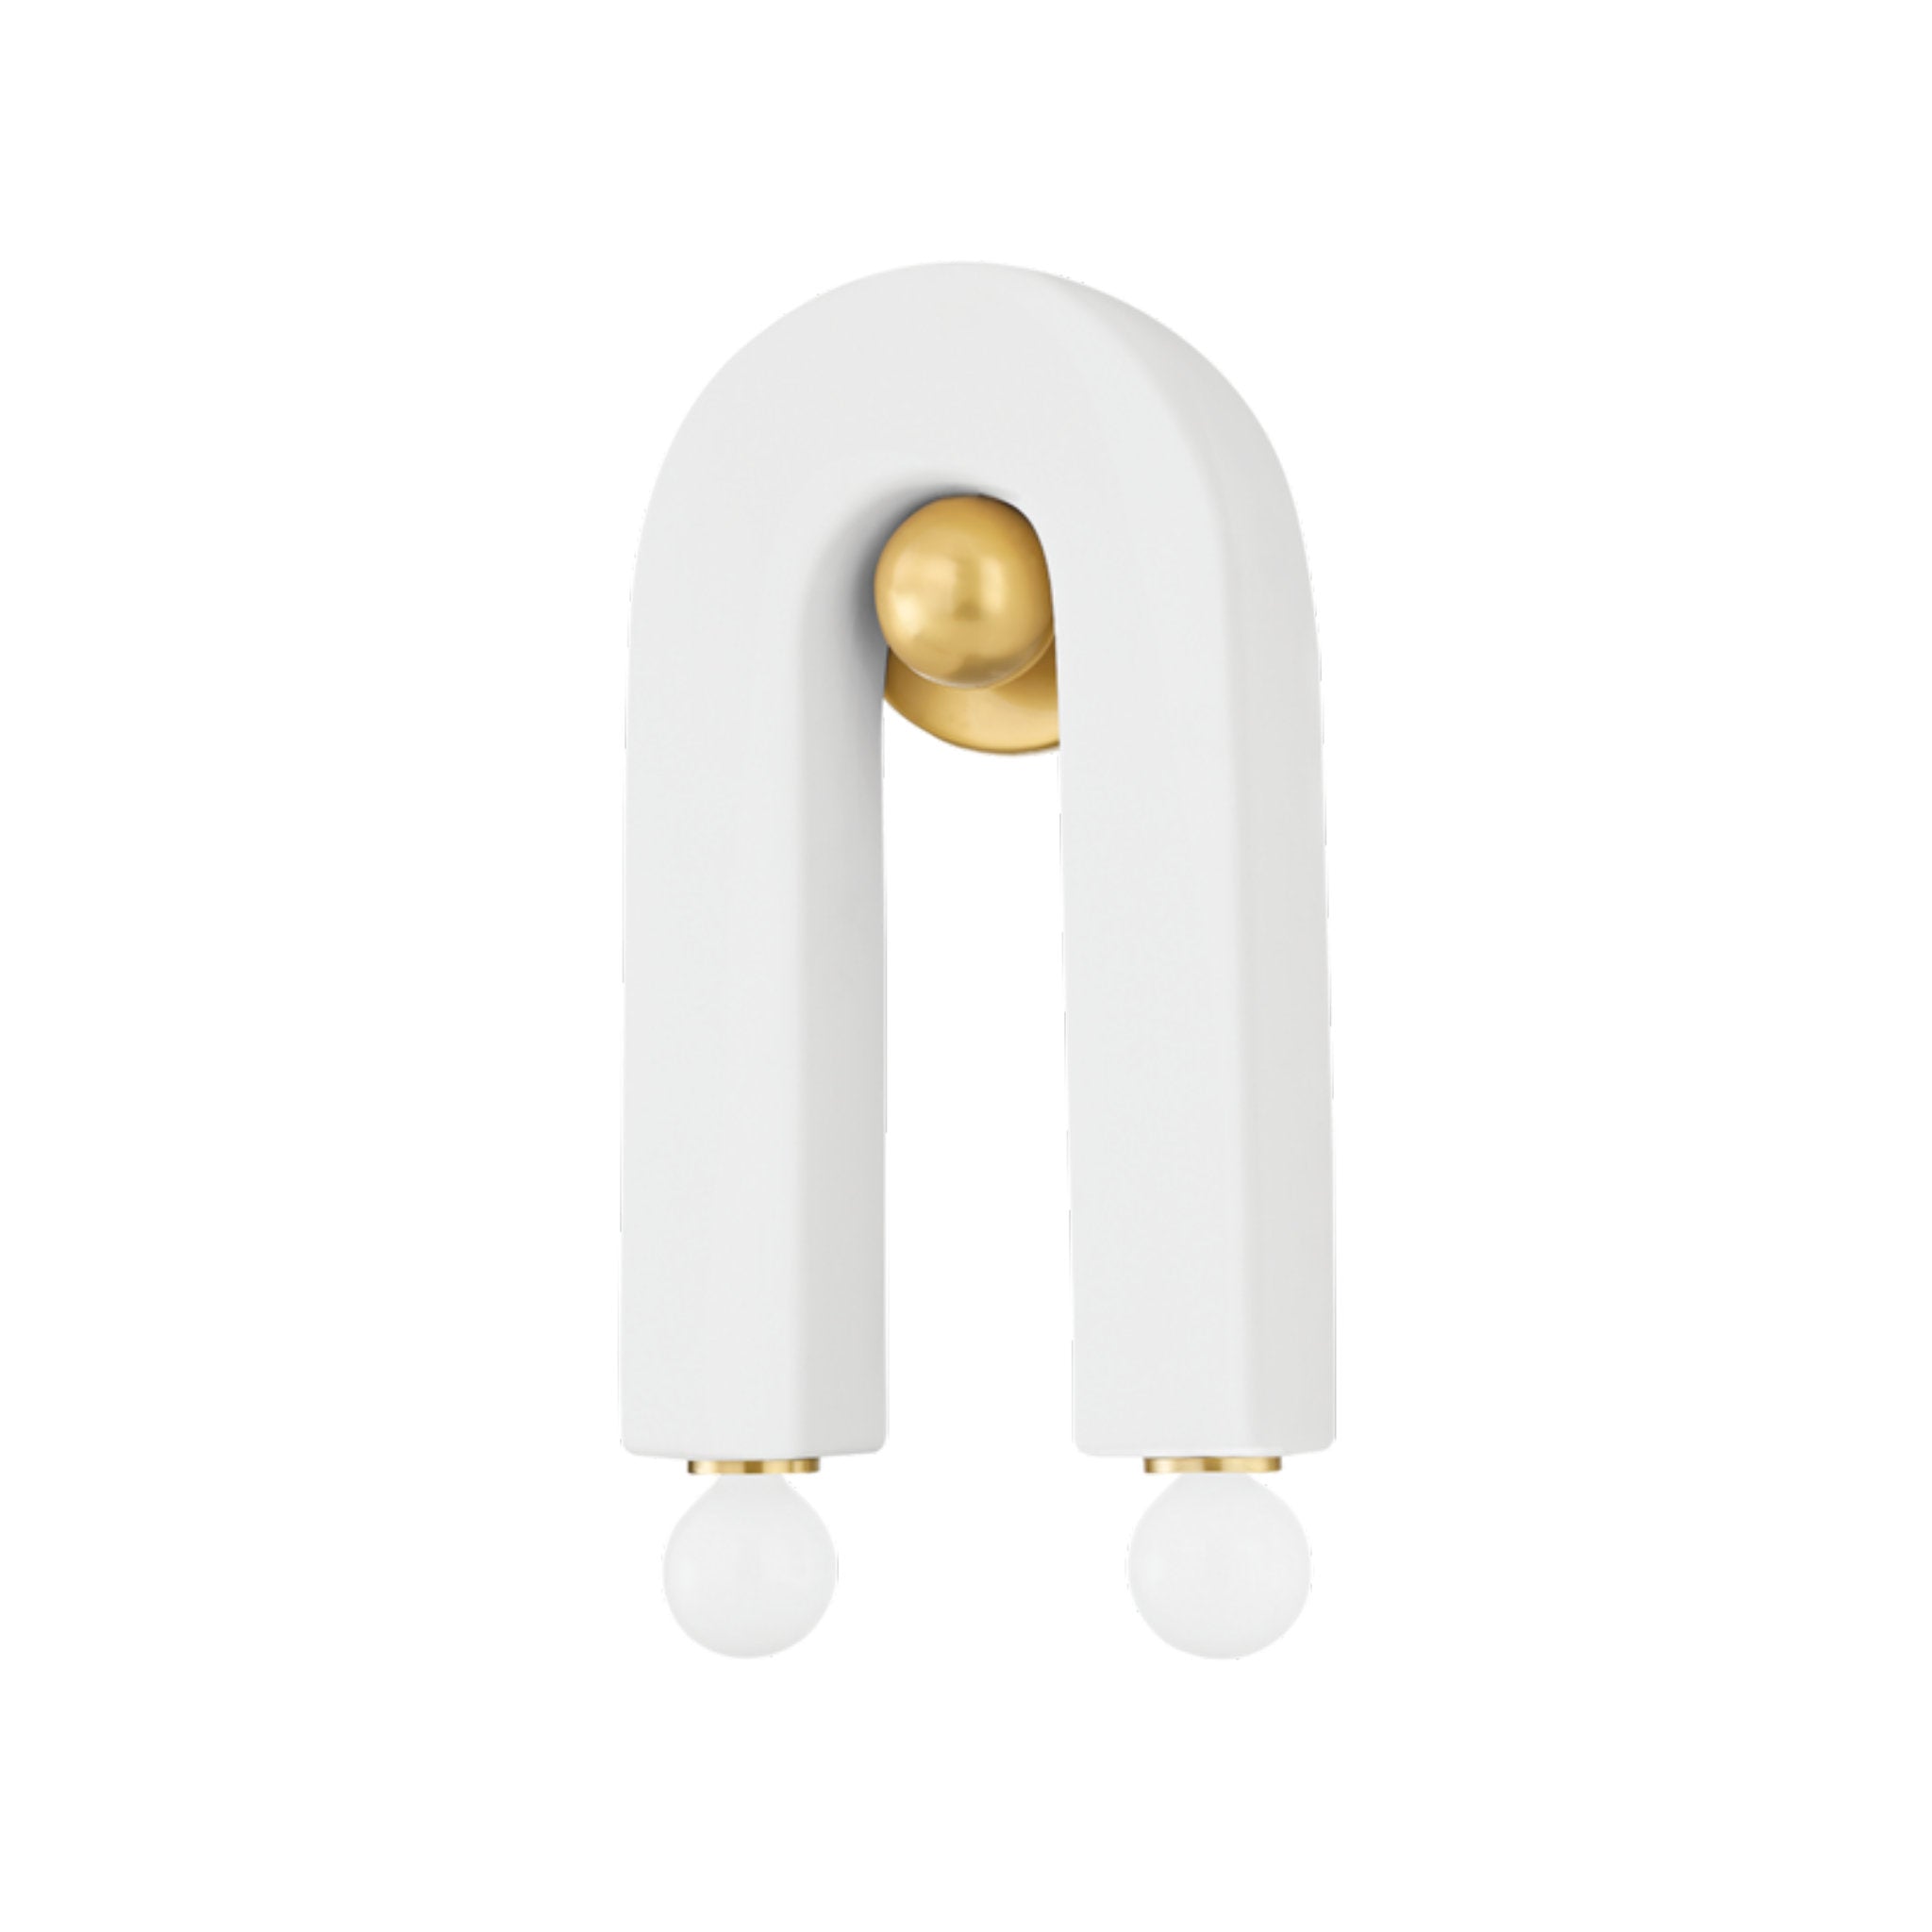 Roshani 2 Light Wall Sconce in Aged Brass/Ceramic Raw Matte White by Dabito